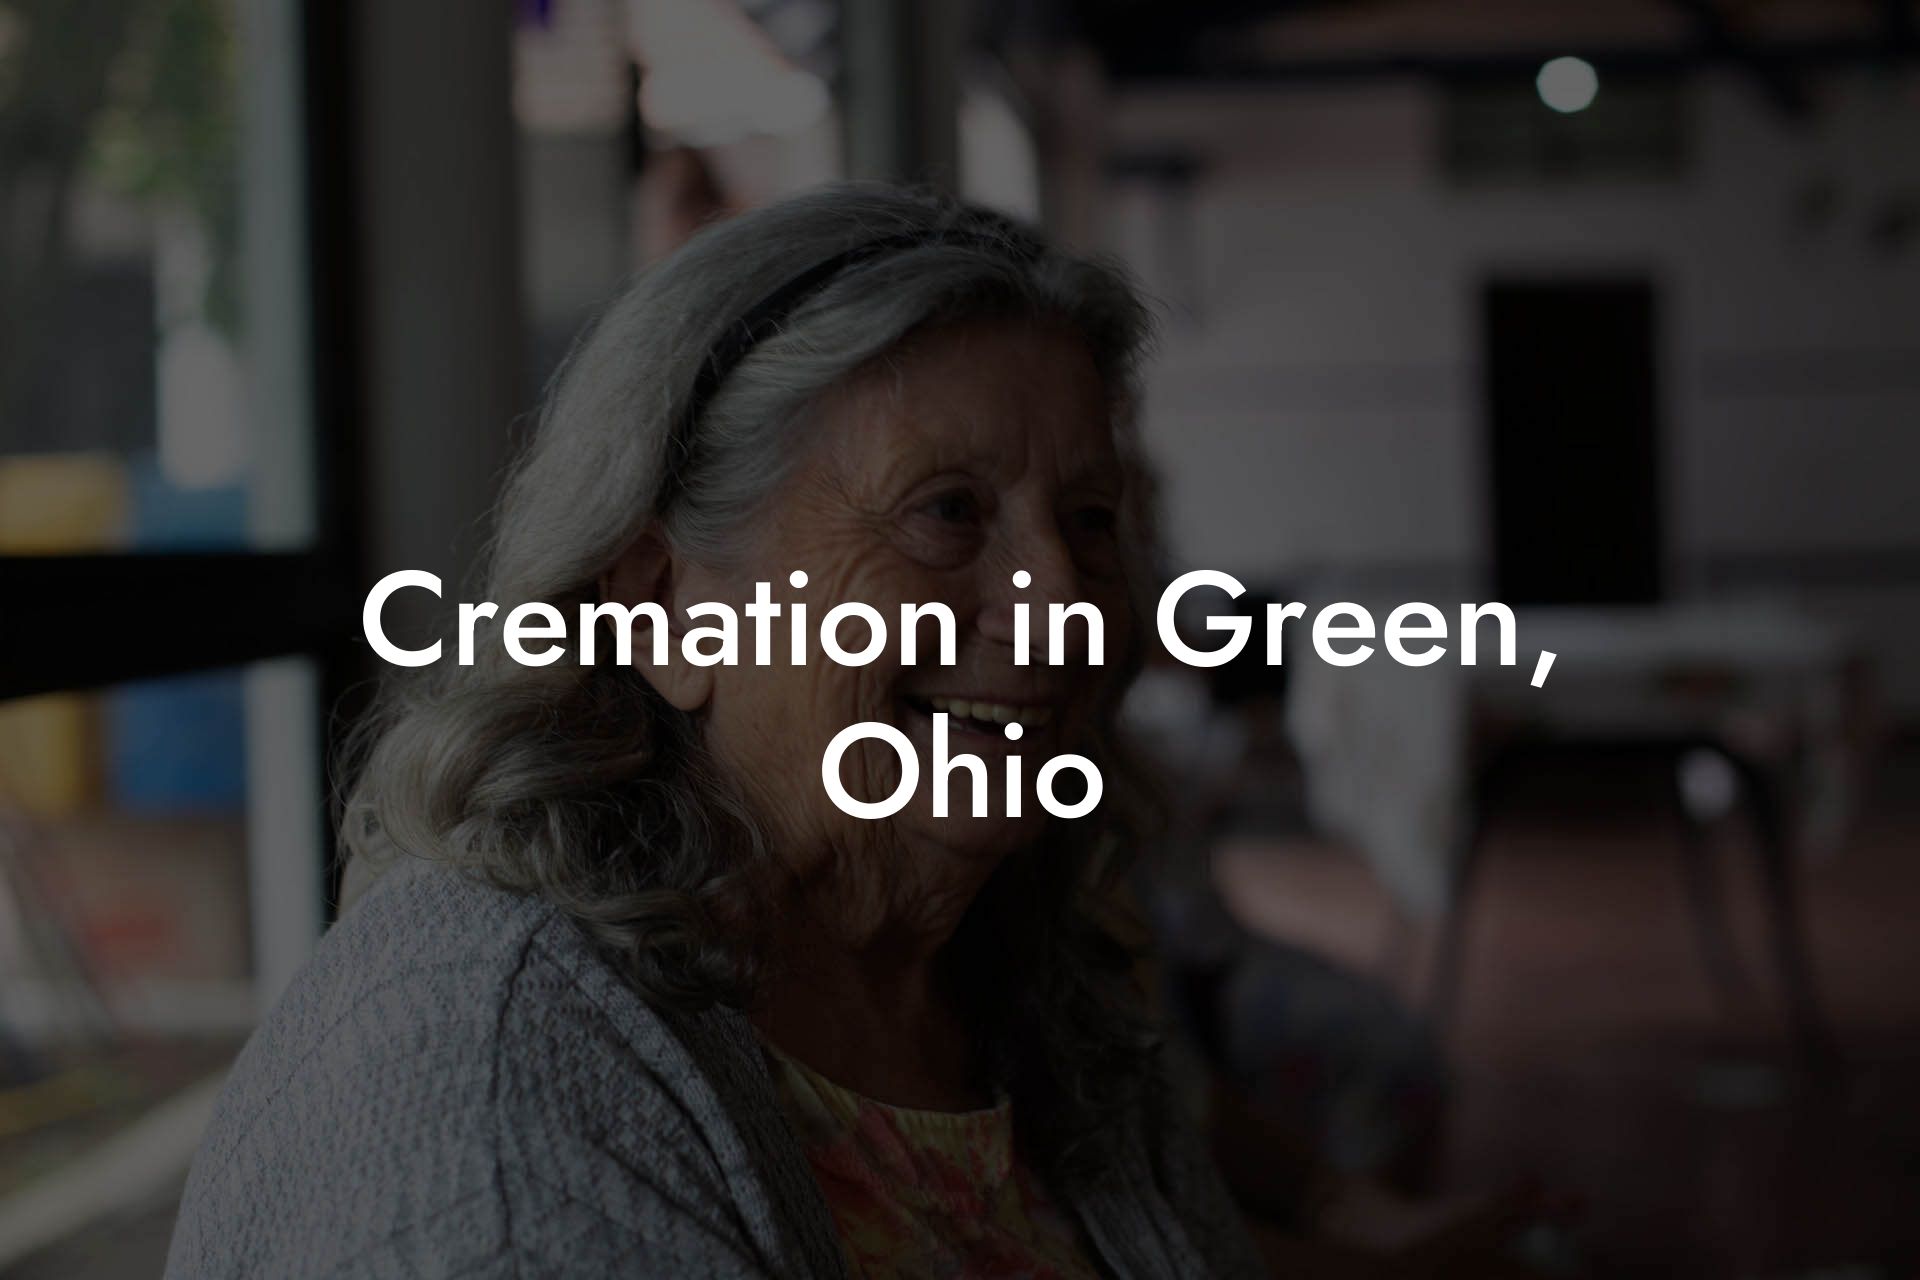 Cremation in Green, Ohio